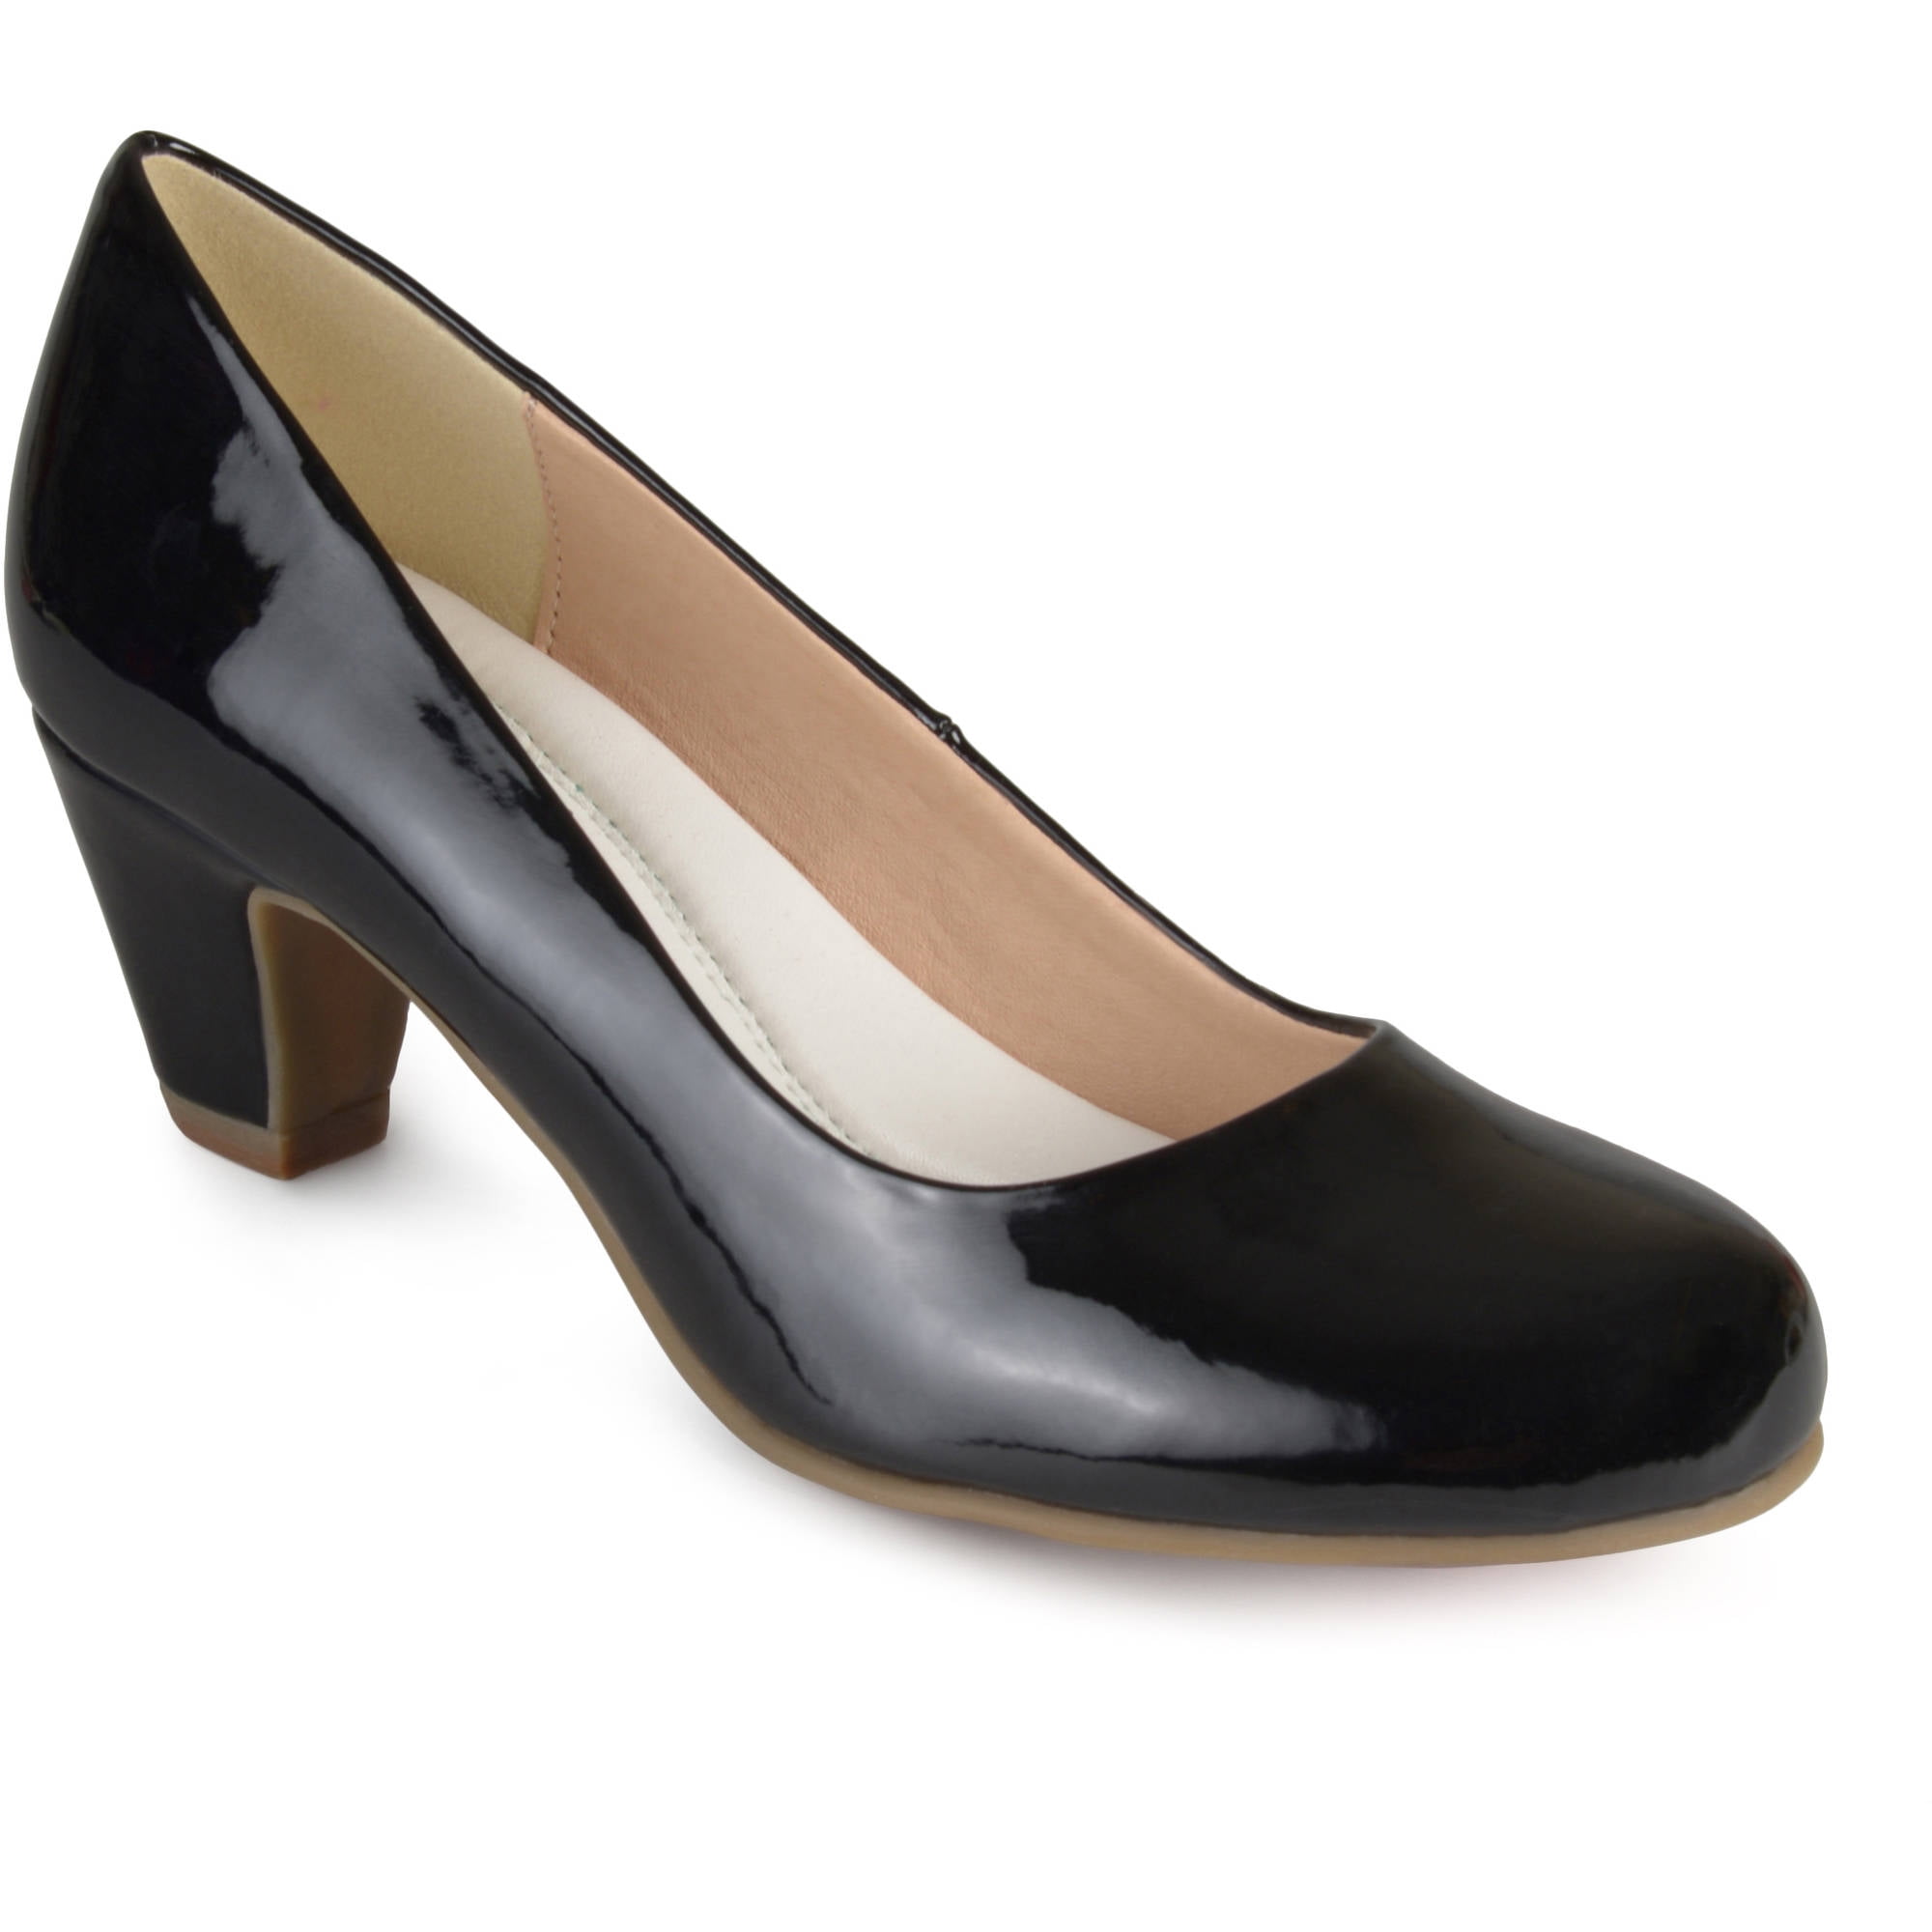 Brinley Co. - Brinley Co. Womens Patent Comfort Fit Classic Pumps ...